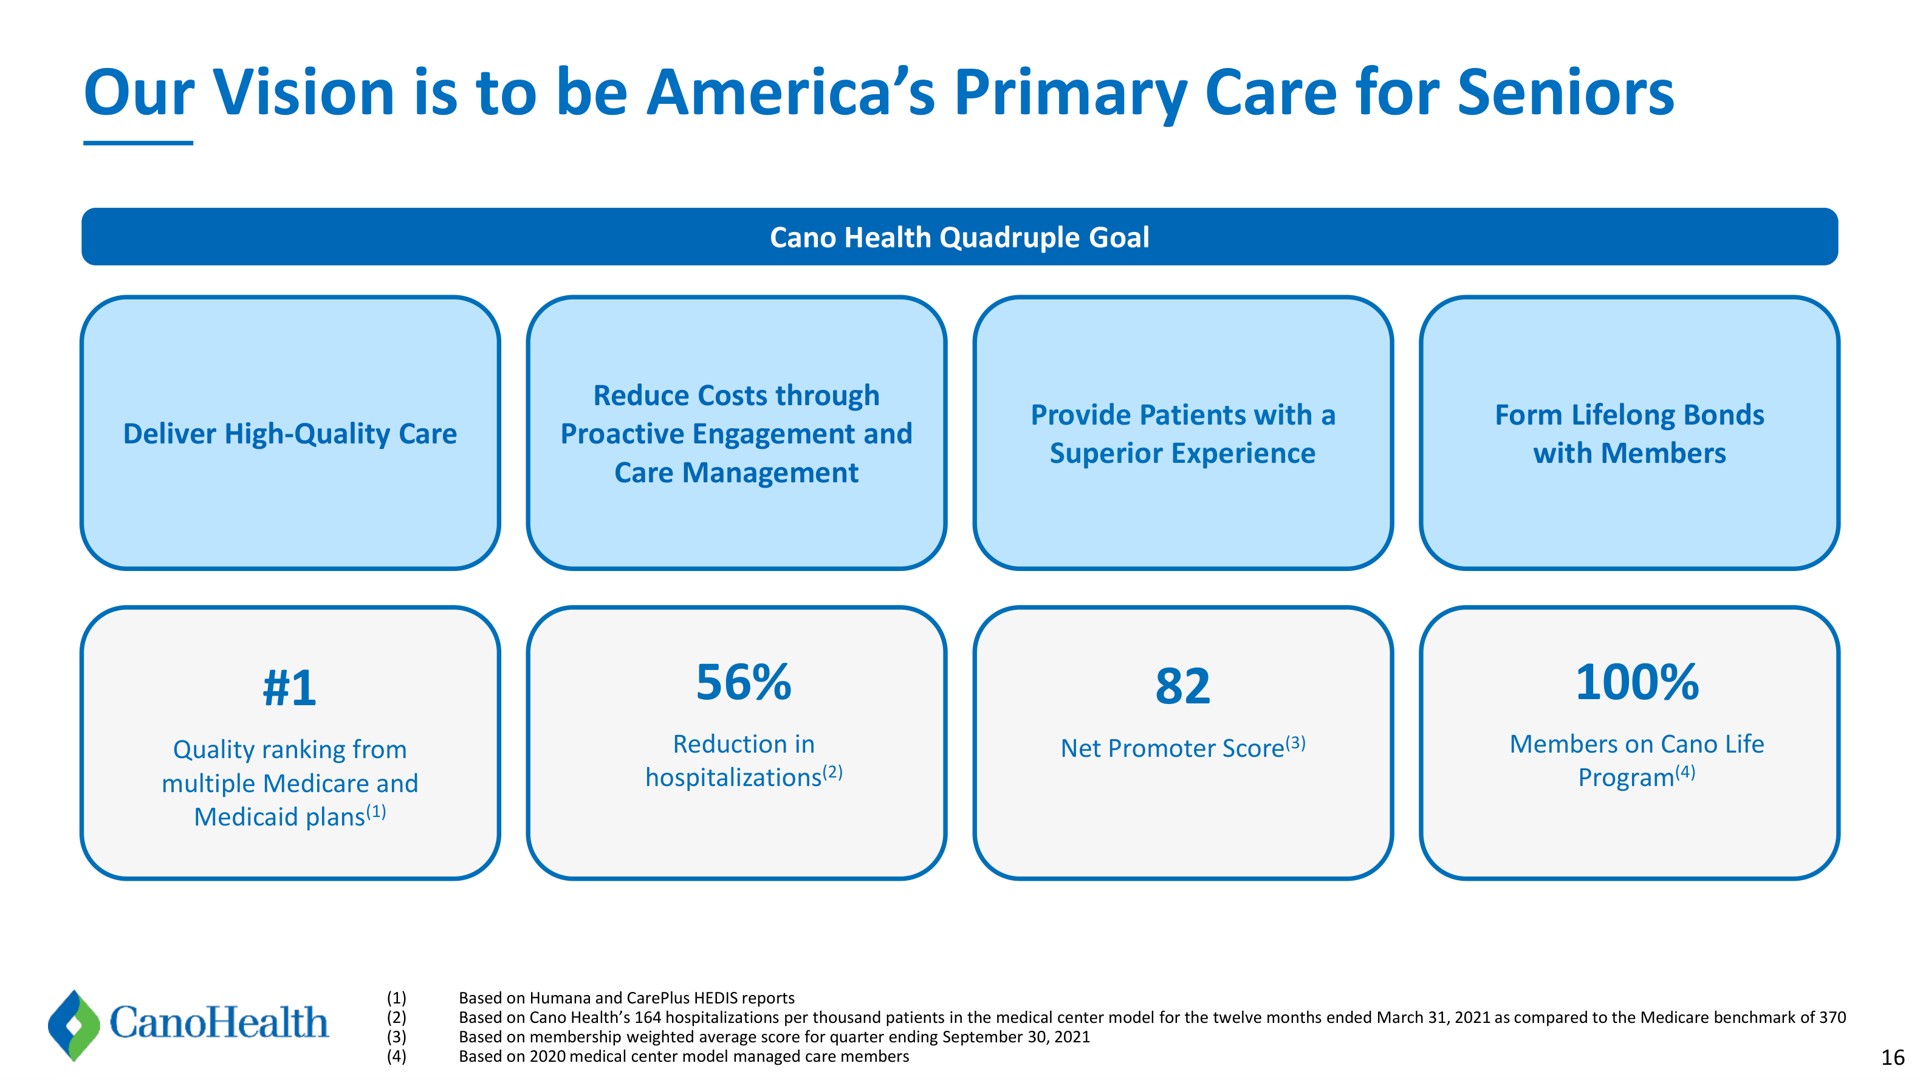 our vision is to be primary care for seniors | Cano Health